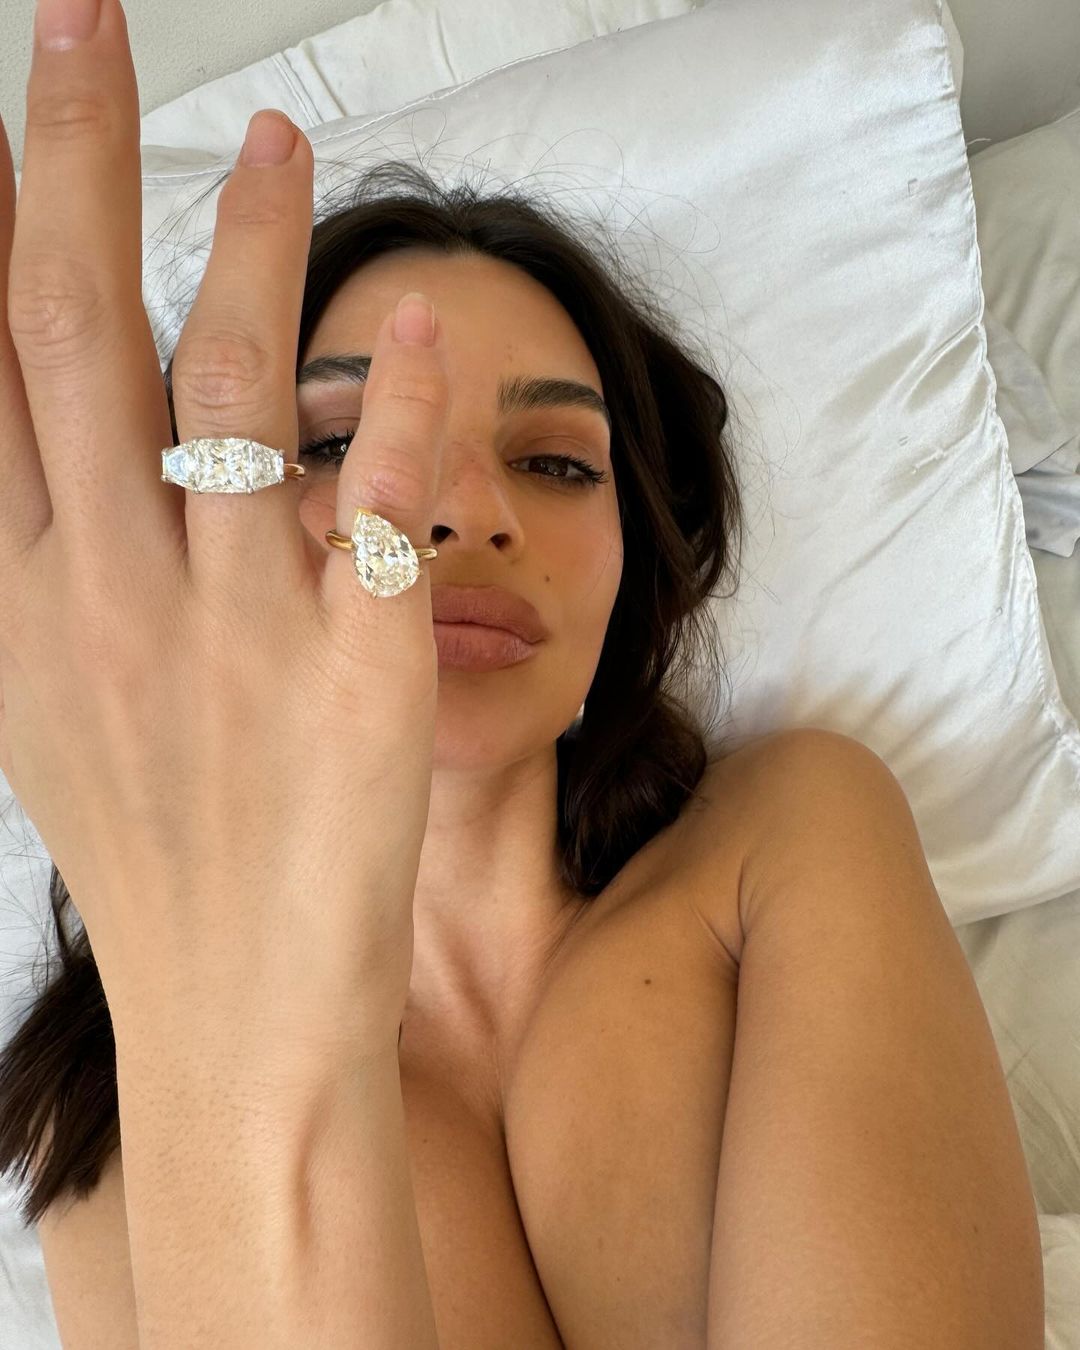 Emily Ratajkowski debuts her reset diamond rings, thanks to jewelry designer Alison Lou. Originally from her toi et moi engagement ring, the model had her diamonds reset for two revamped 'divorce rings.'